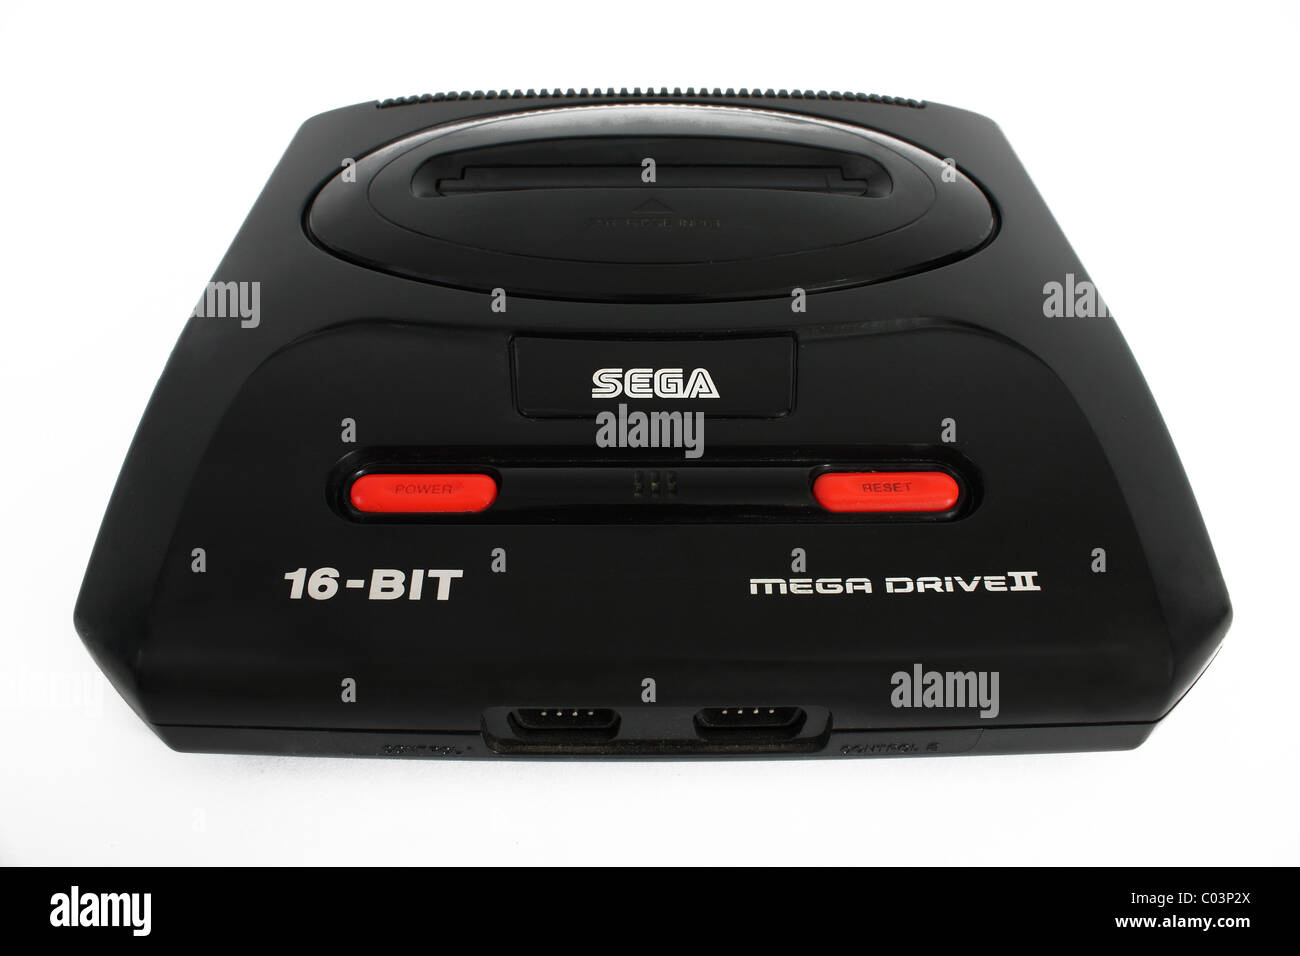 An old retro gaming video games console system called the Sega Mega Drive 16 Bit edition on a white background Stock Photo